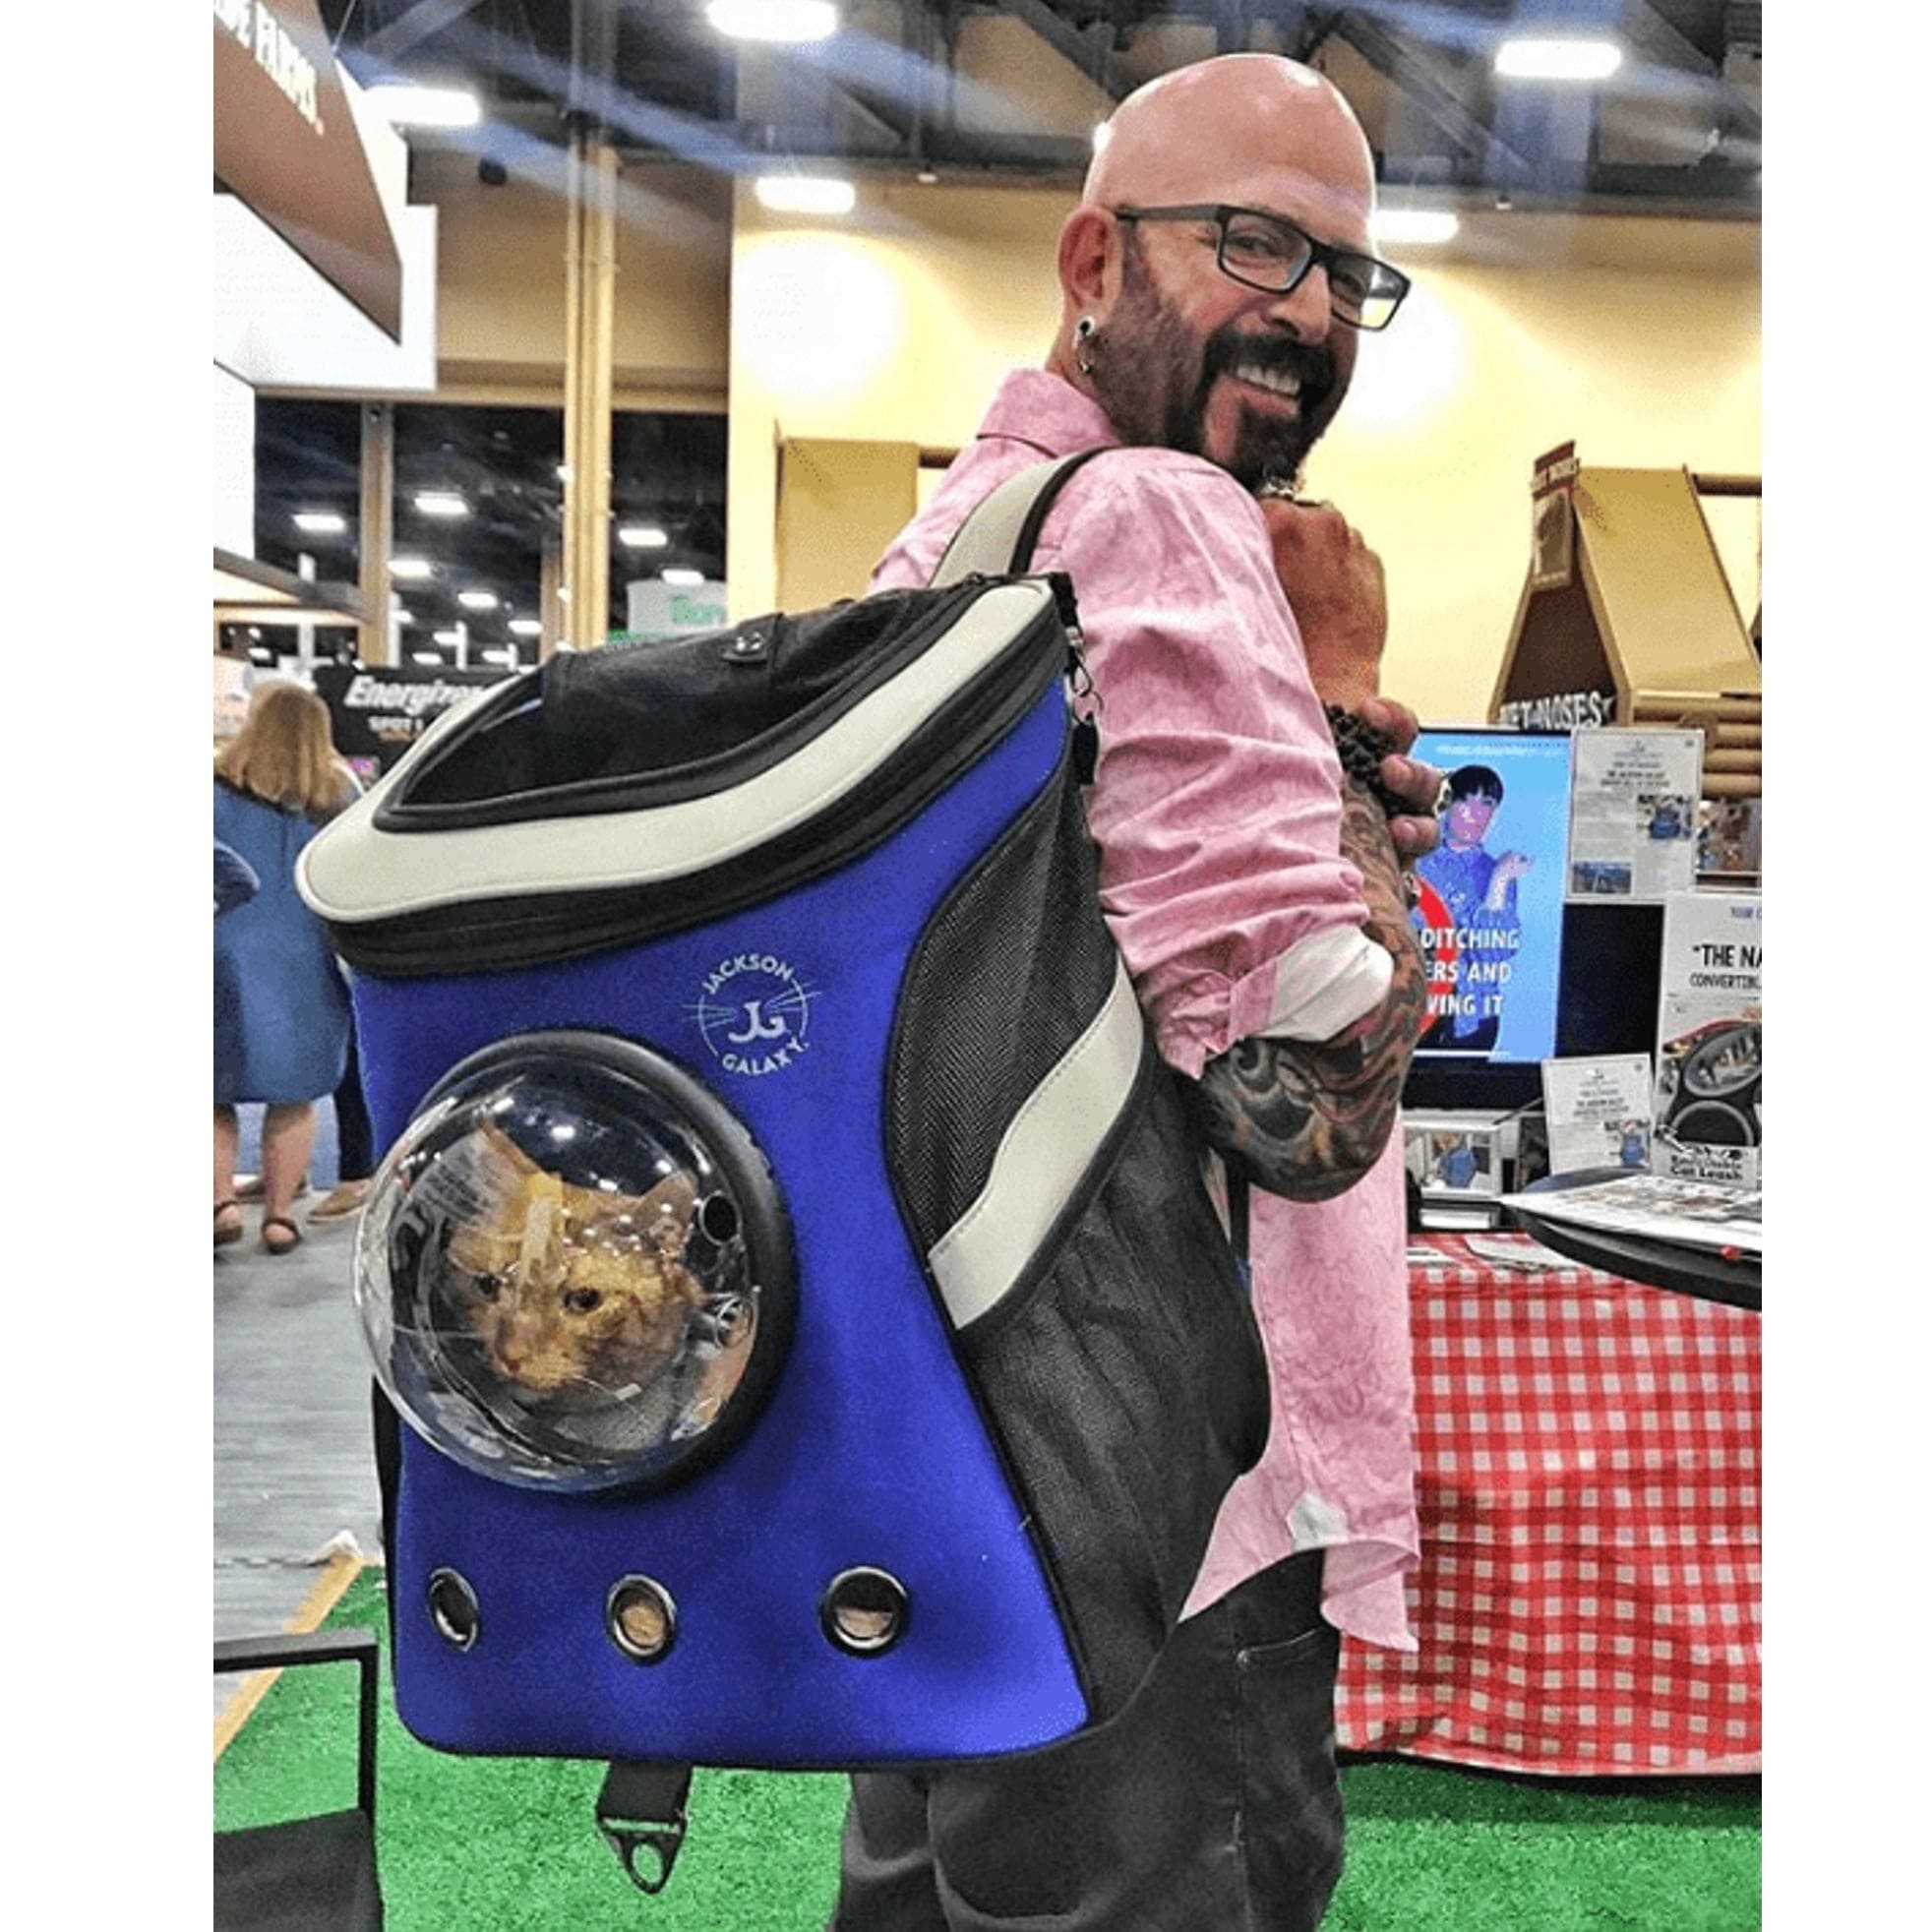 The Jackson Galaxy Convertible Cat Backpack Carrier